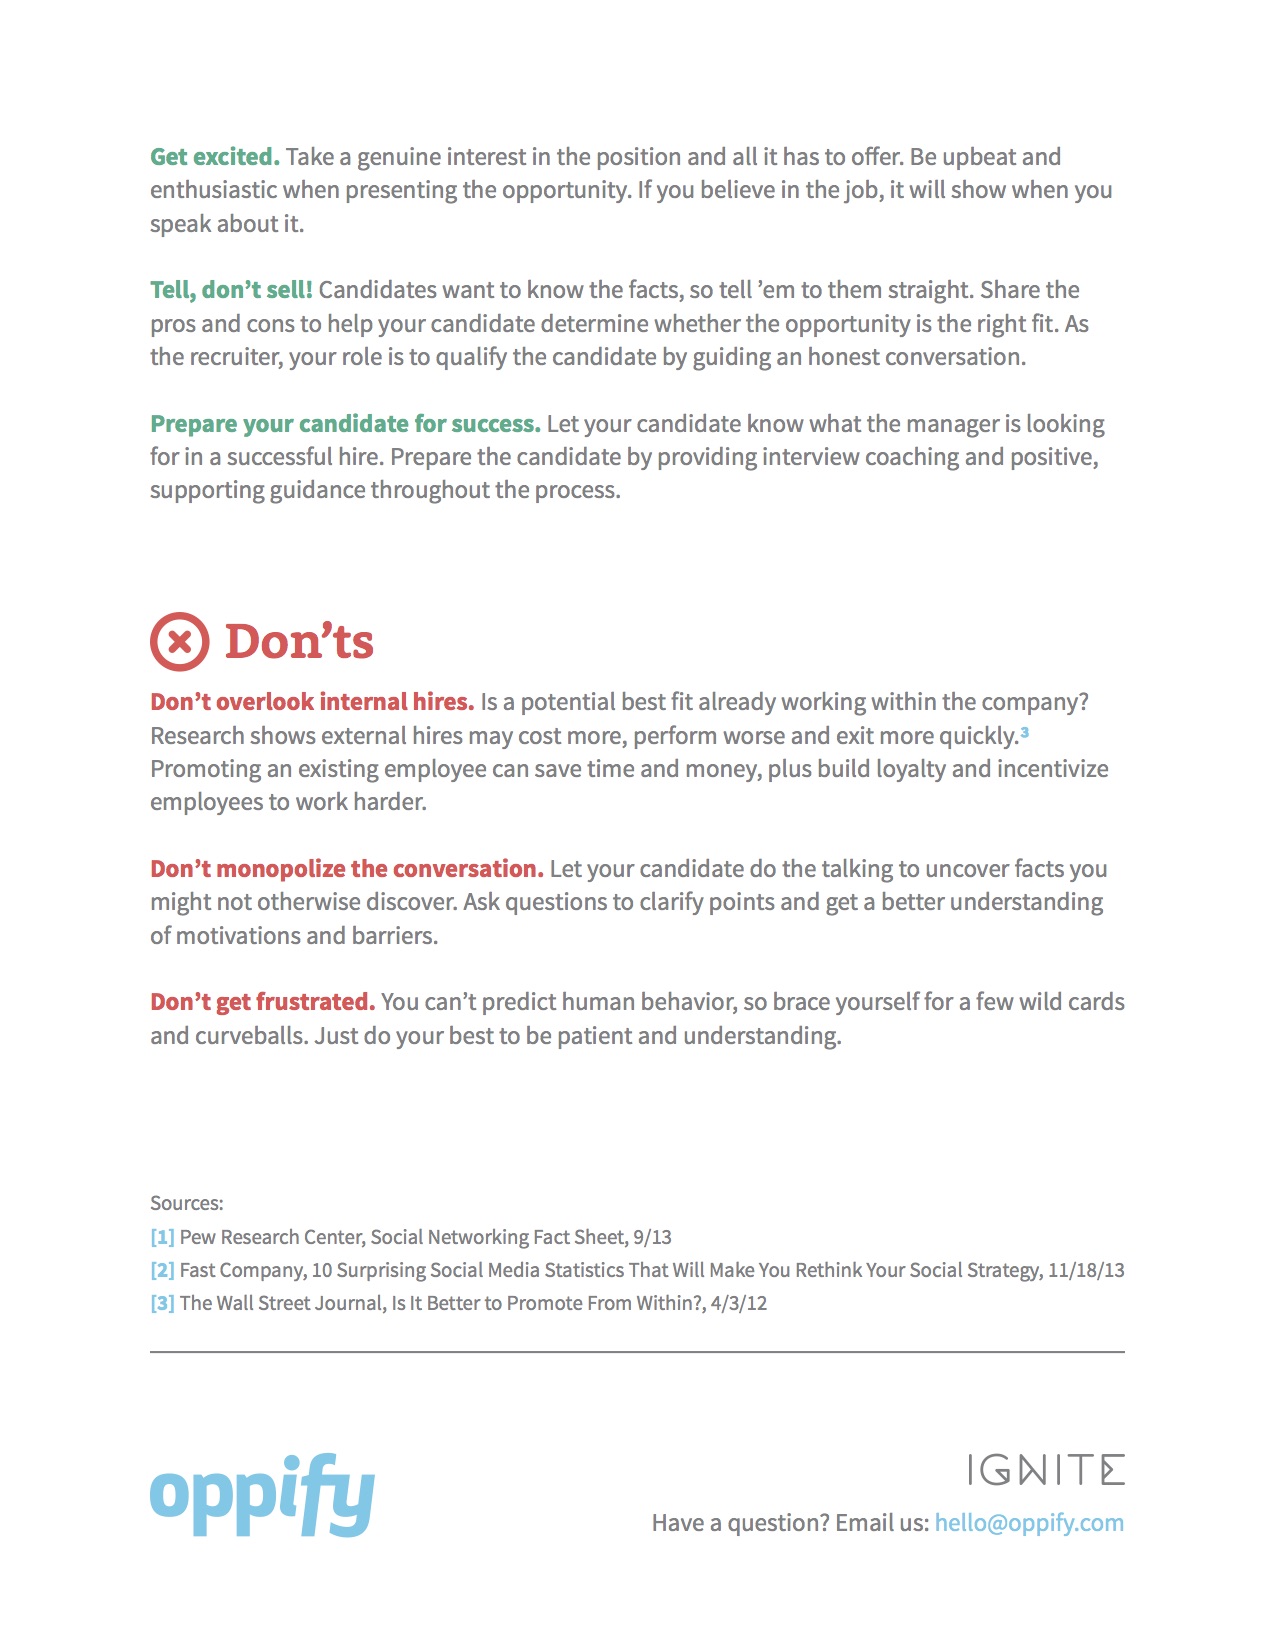 Oppify Recruiter Do's and Don'ts Back Page